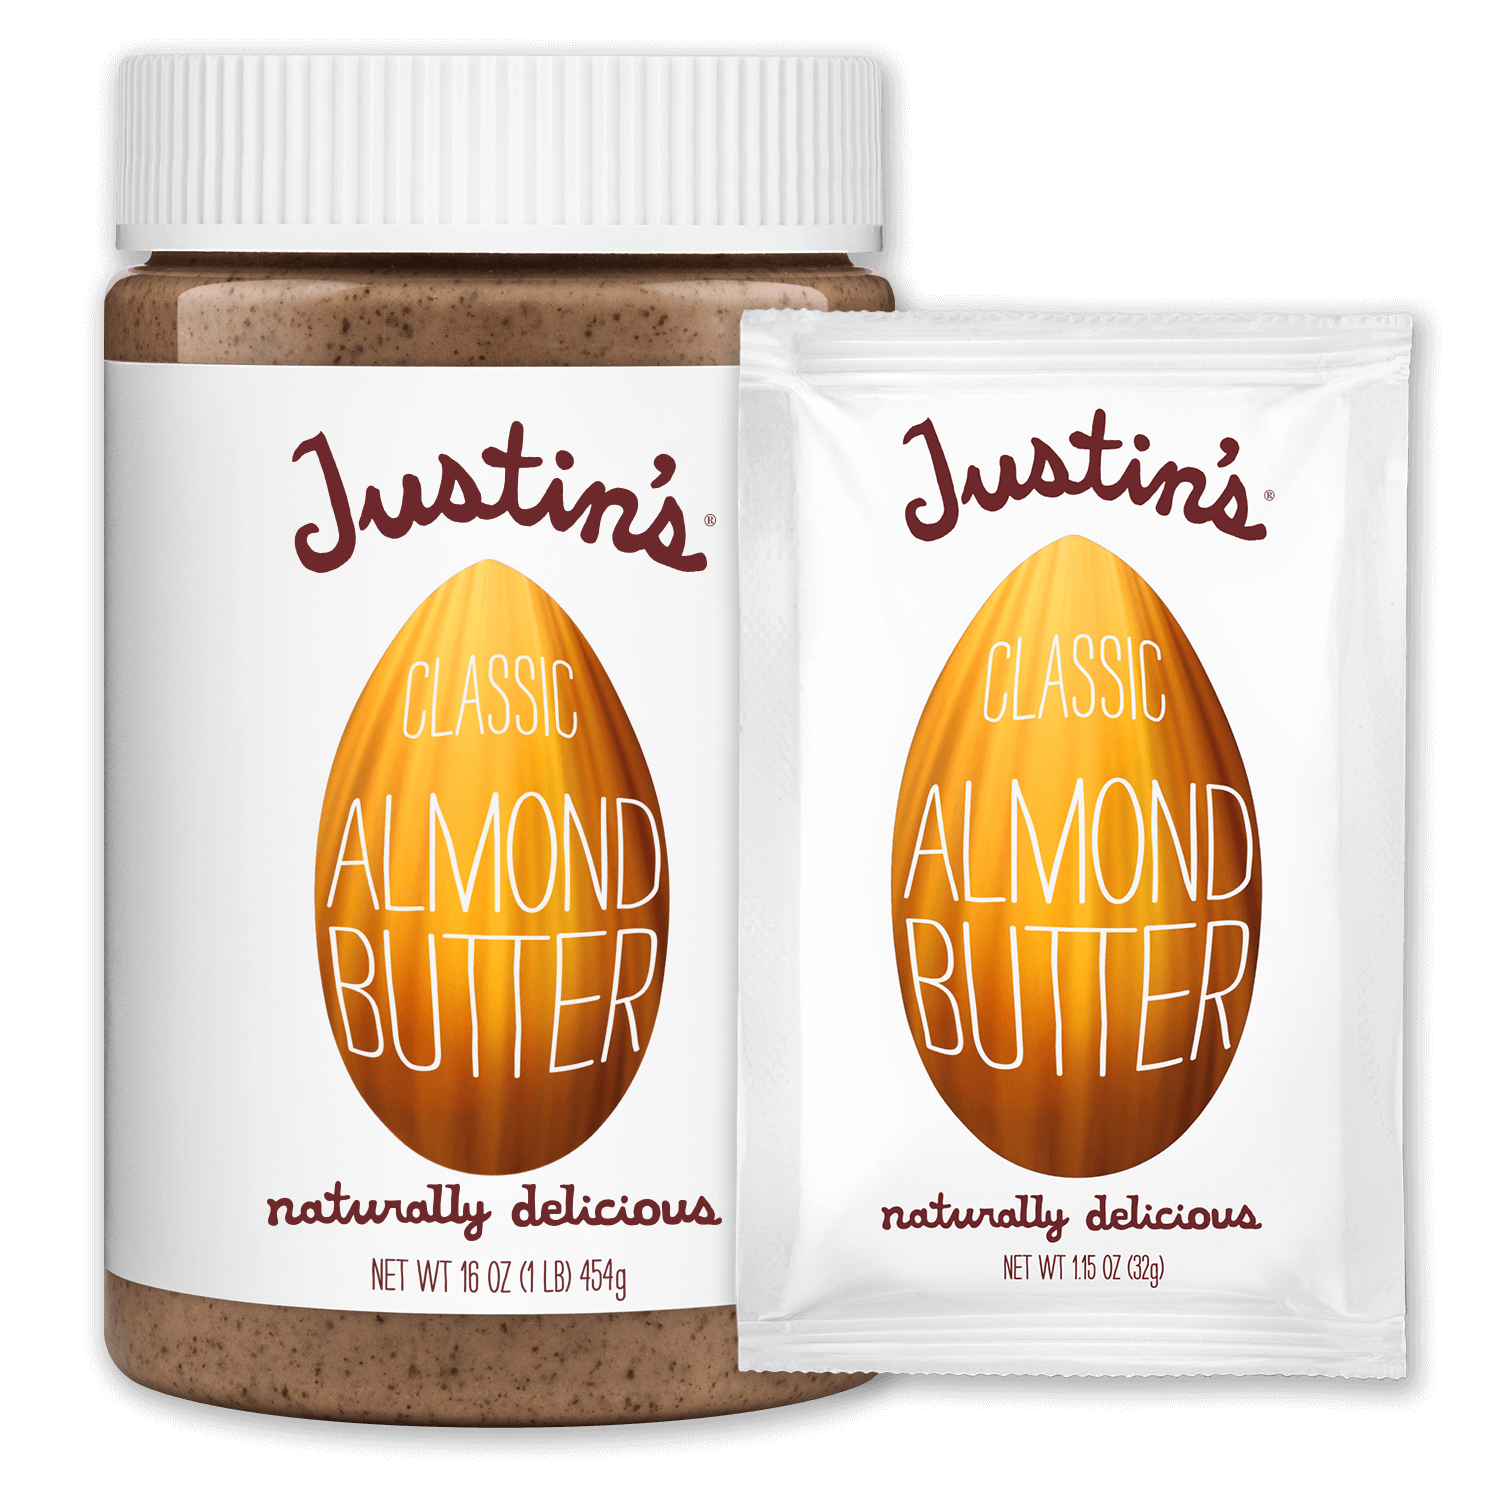 Edele Rondlopen bloem Classic Almond Butter | JUSTIN'S® Products